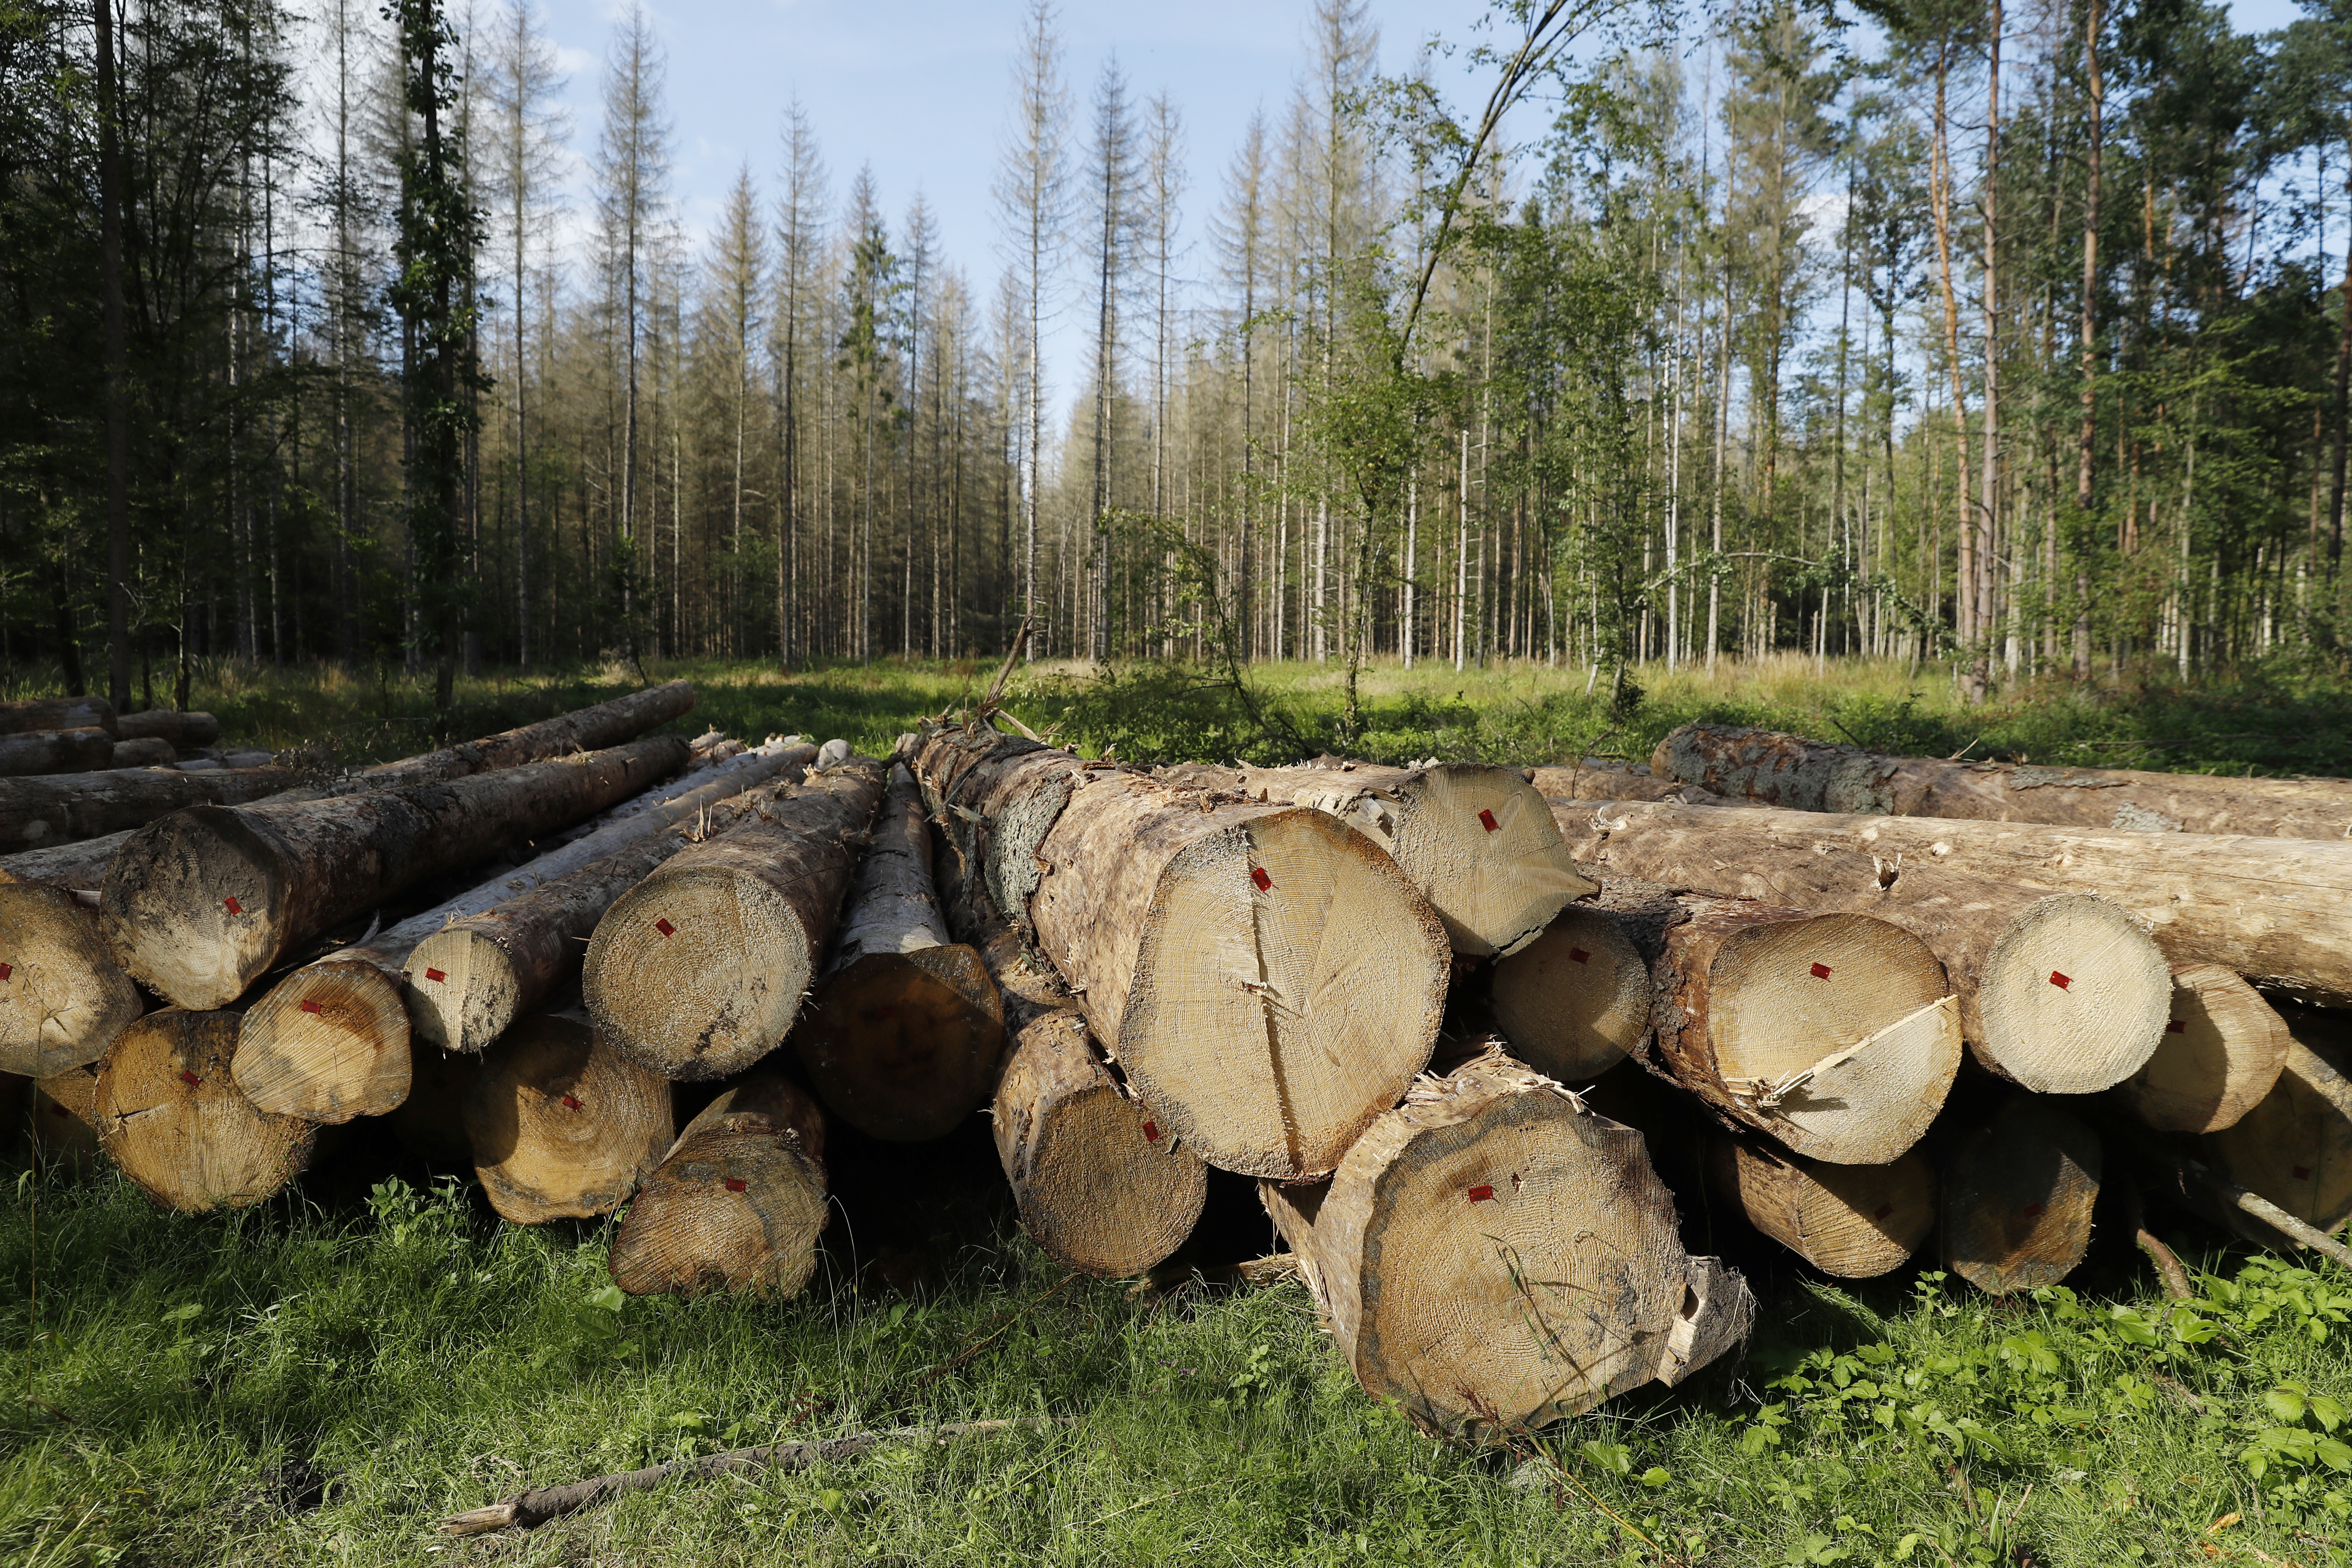 Logged trees are seen after logging at Bialowieza forest